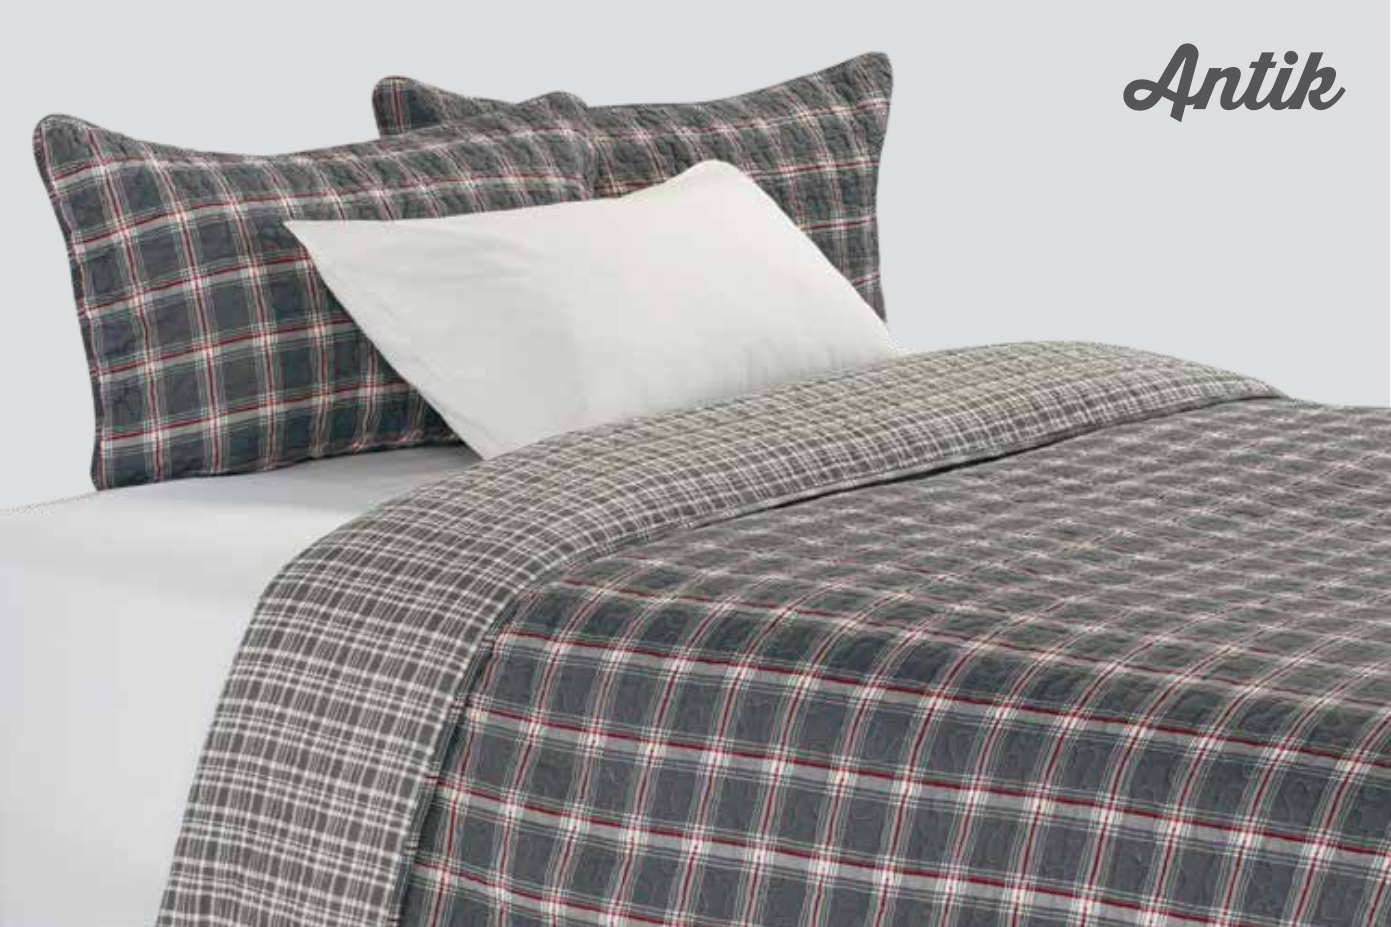 Robert, a Quilt Bedding collection from Brunelli